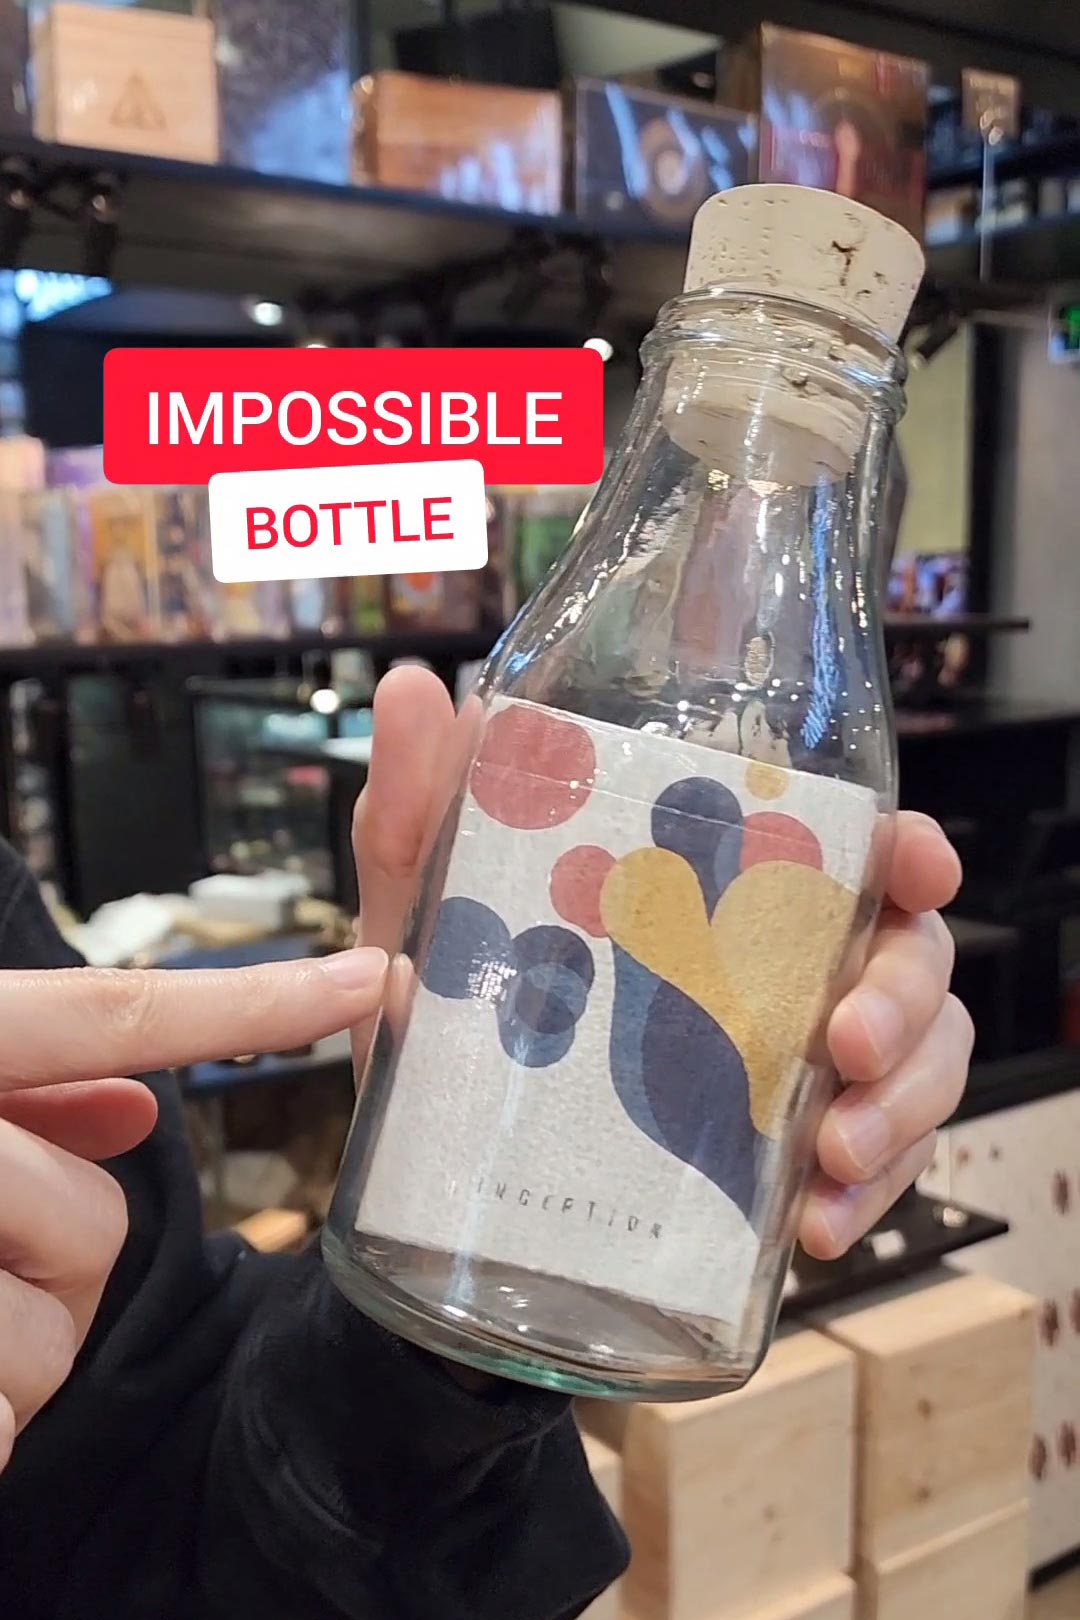 What is an Impossible Bottle?